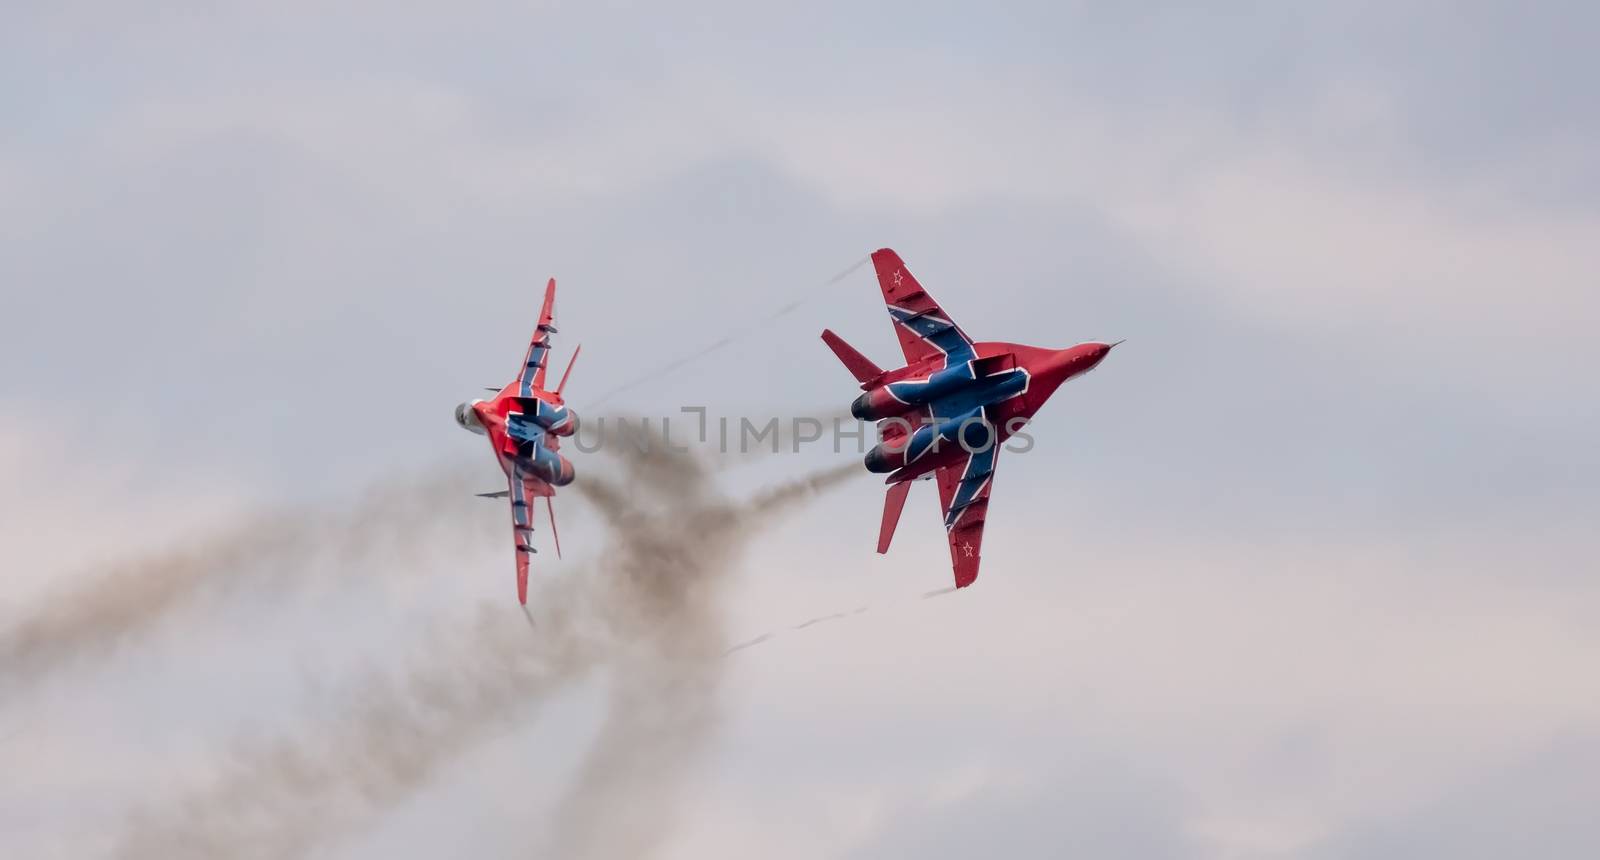 Barnaul, Russia - September 19, 2020: A low angle close-up shot of Strizhi MiG-29 fighter jet performing stunts during an aeroshow. White cloudy sky as a background.